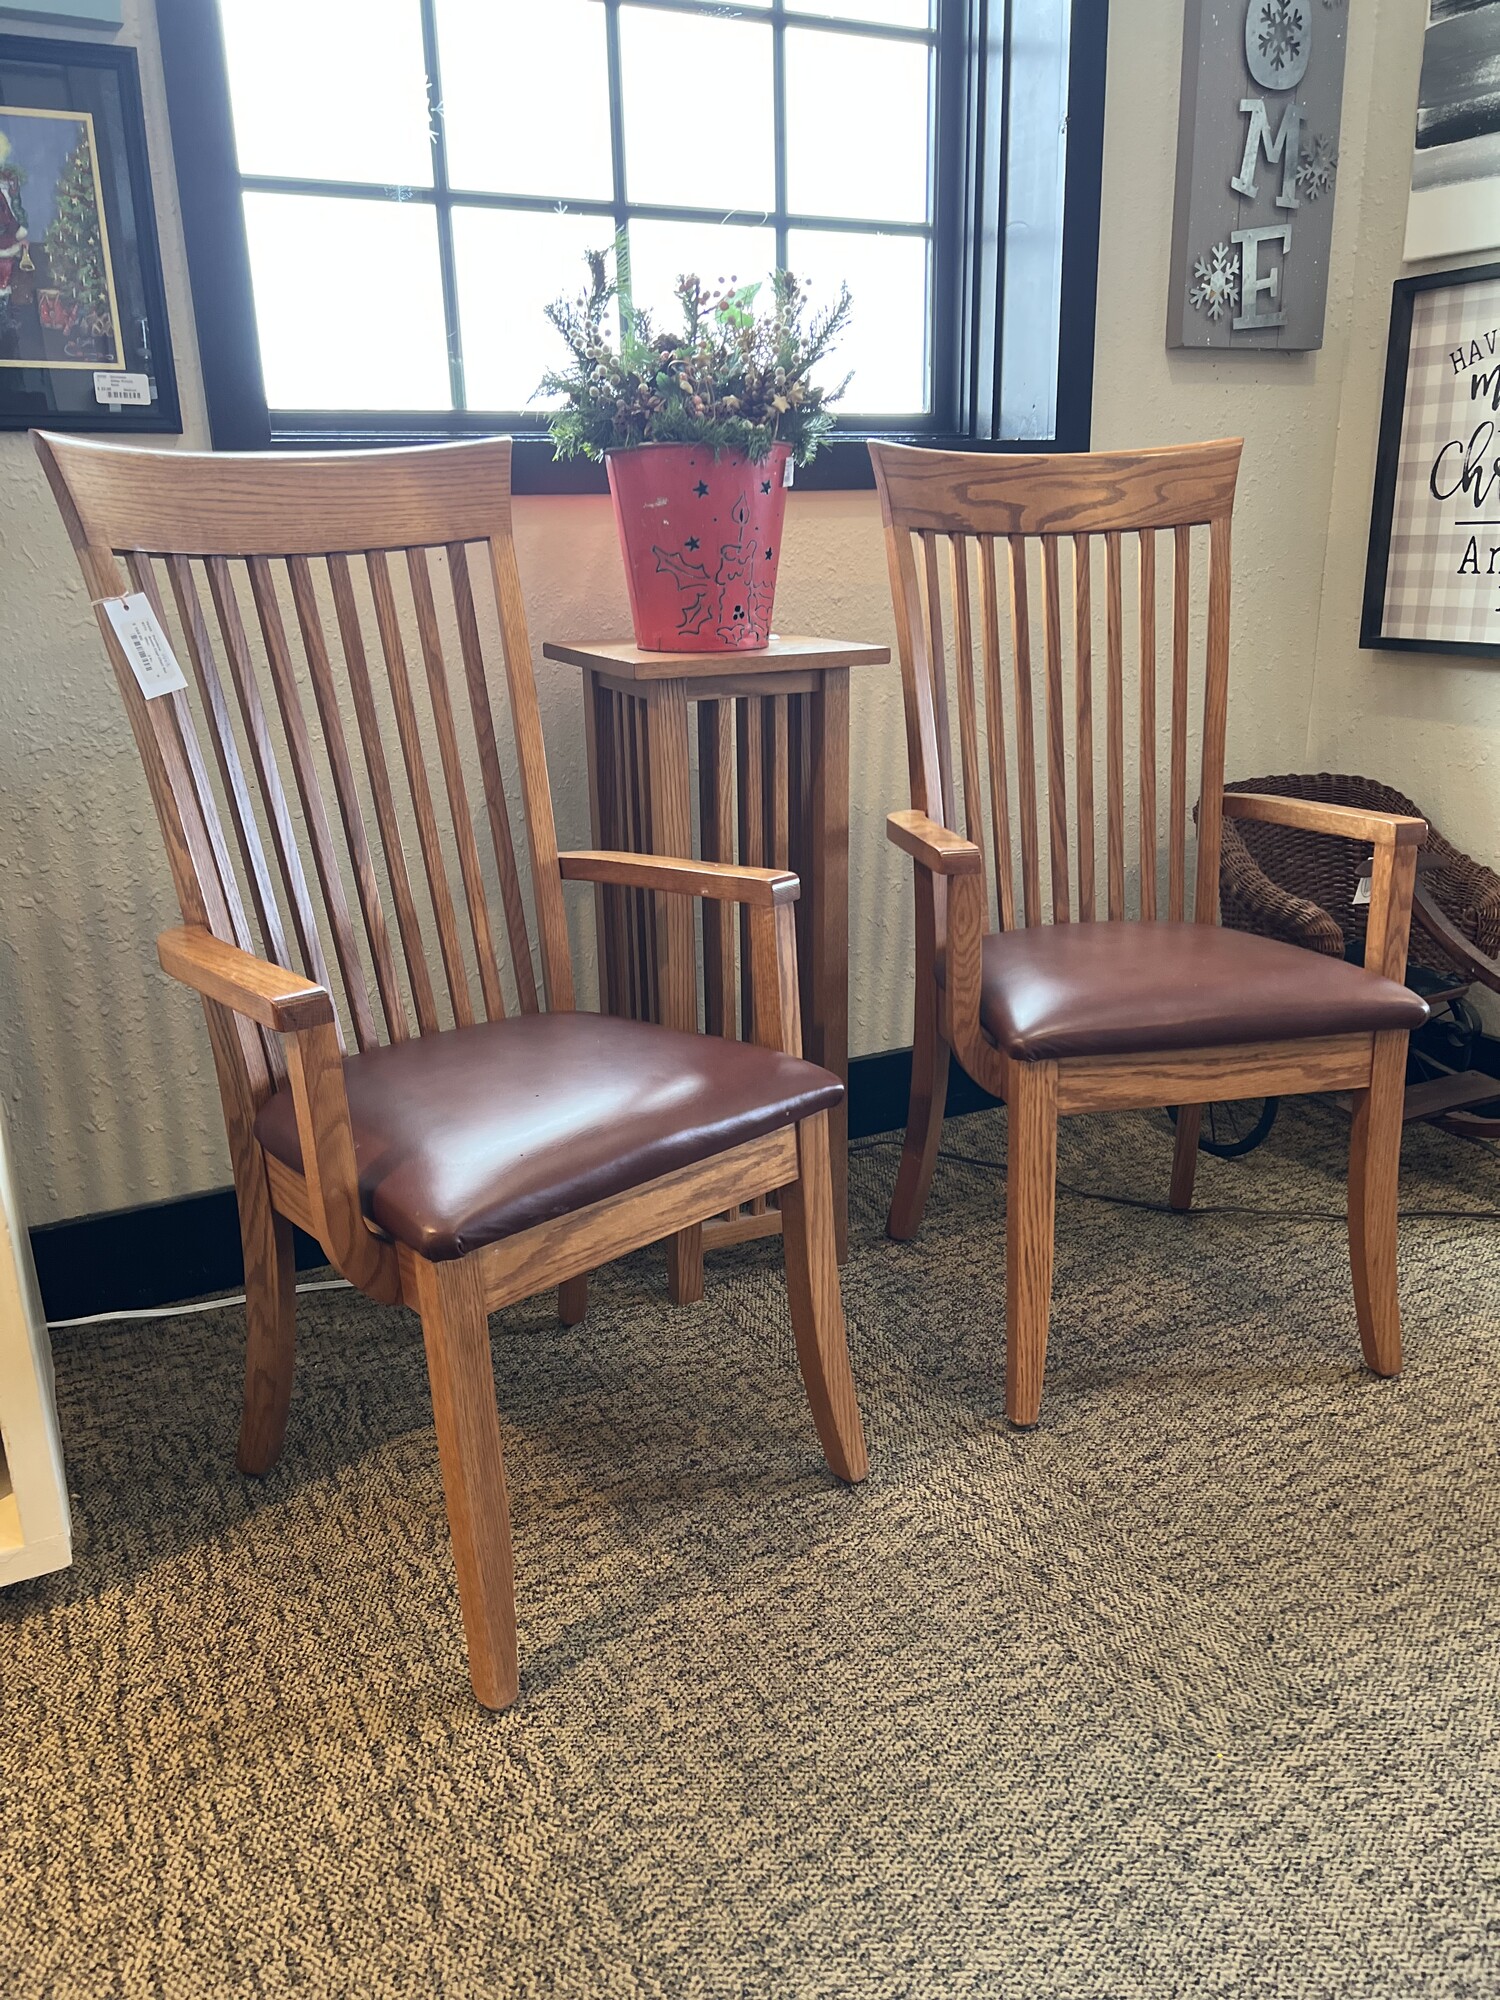 Amish made oak captain chair set.

Includes 2 pieces.

Beautifully hand crafted Amish made oak captain chairs with smooth brown leather cushions.

There are minor scuff marks and wear on the legs.

Each: 41 1/2in tall x 19in wide x 17in deep x 20in tall (seat to floor)